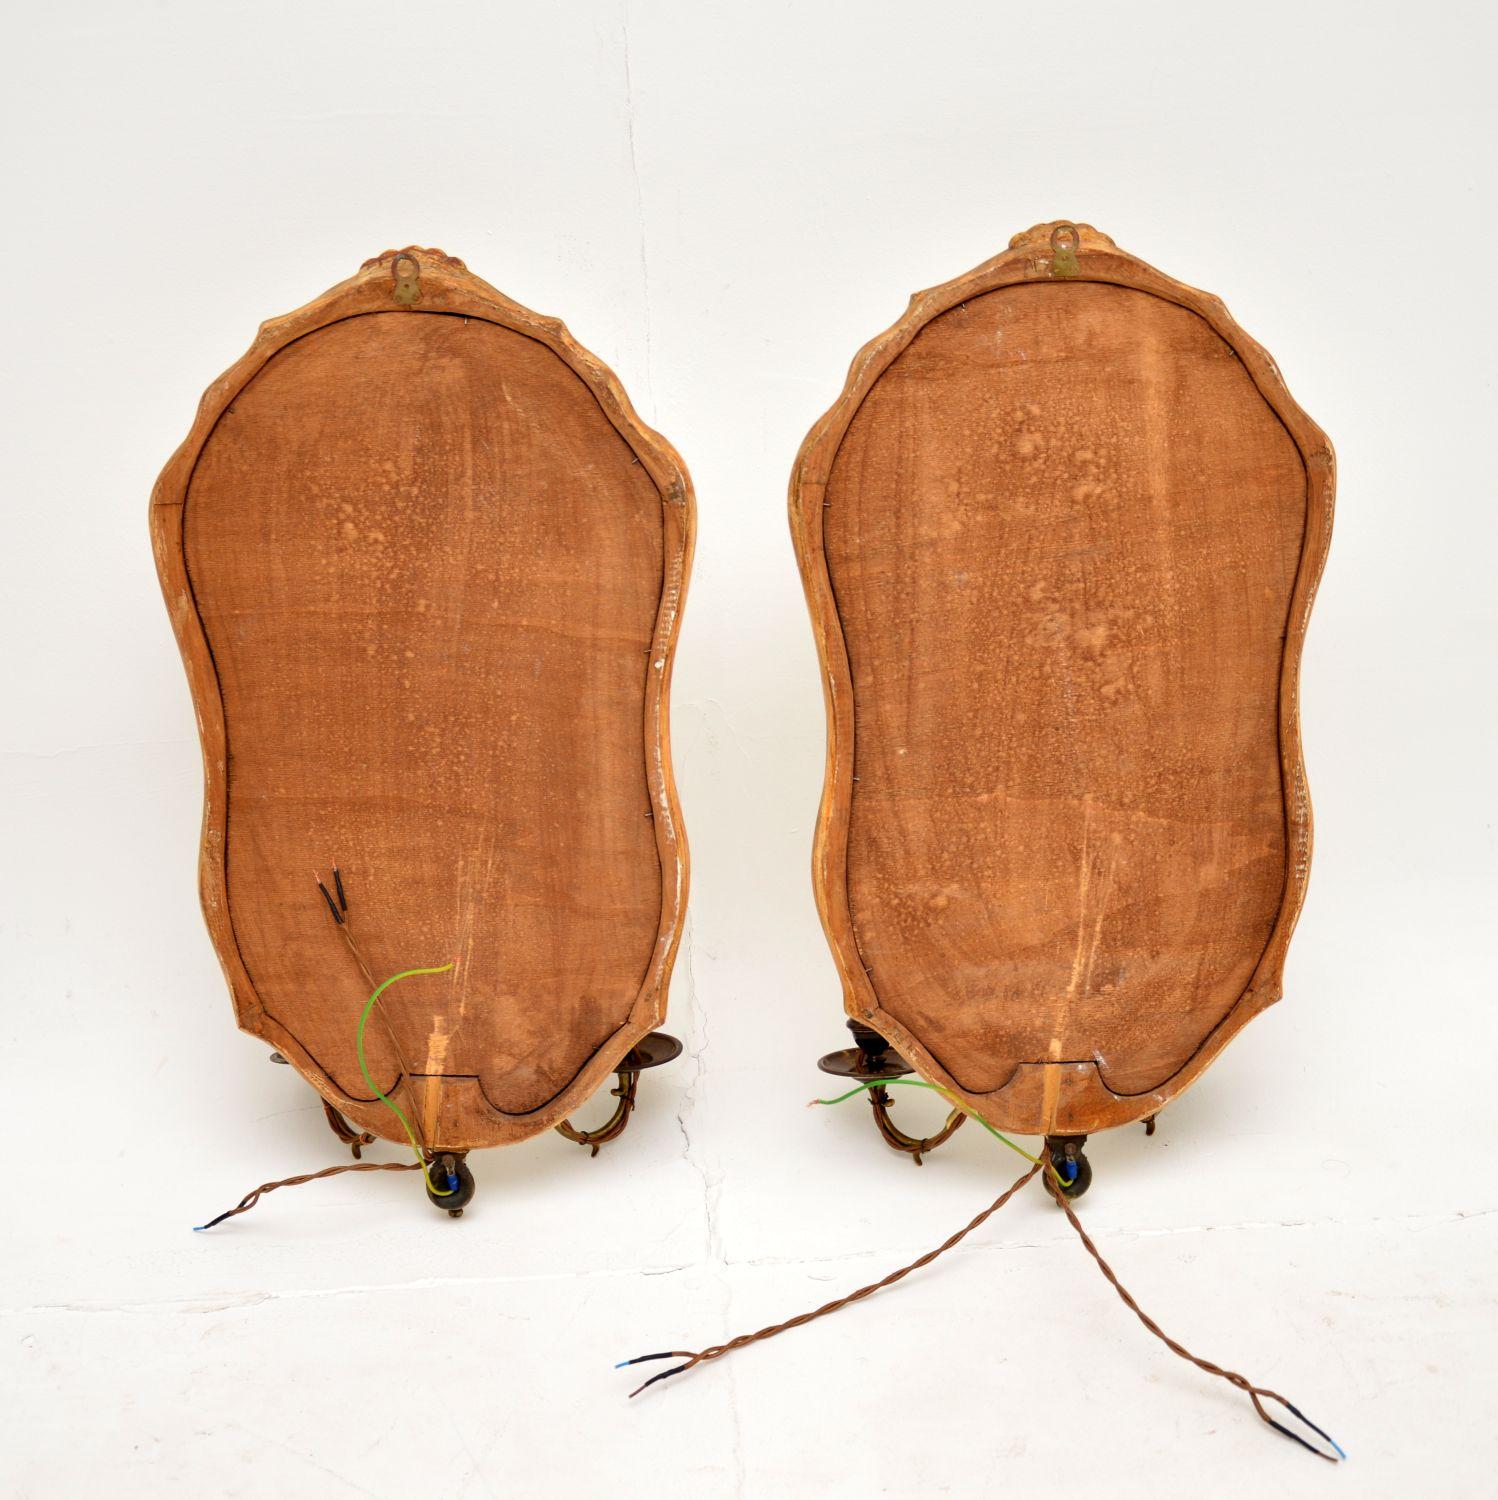 Pair of Antique French Gilt Wood Wall Sconce Mirrors In Good Condition For Sale In London, GB